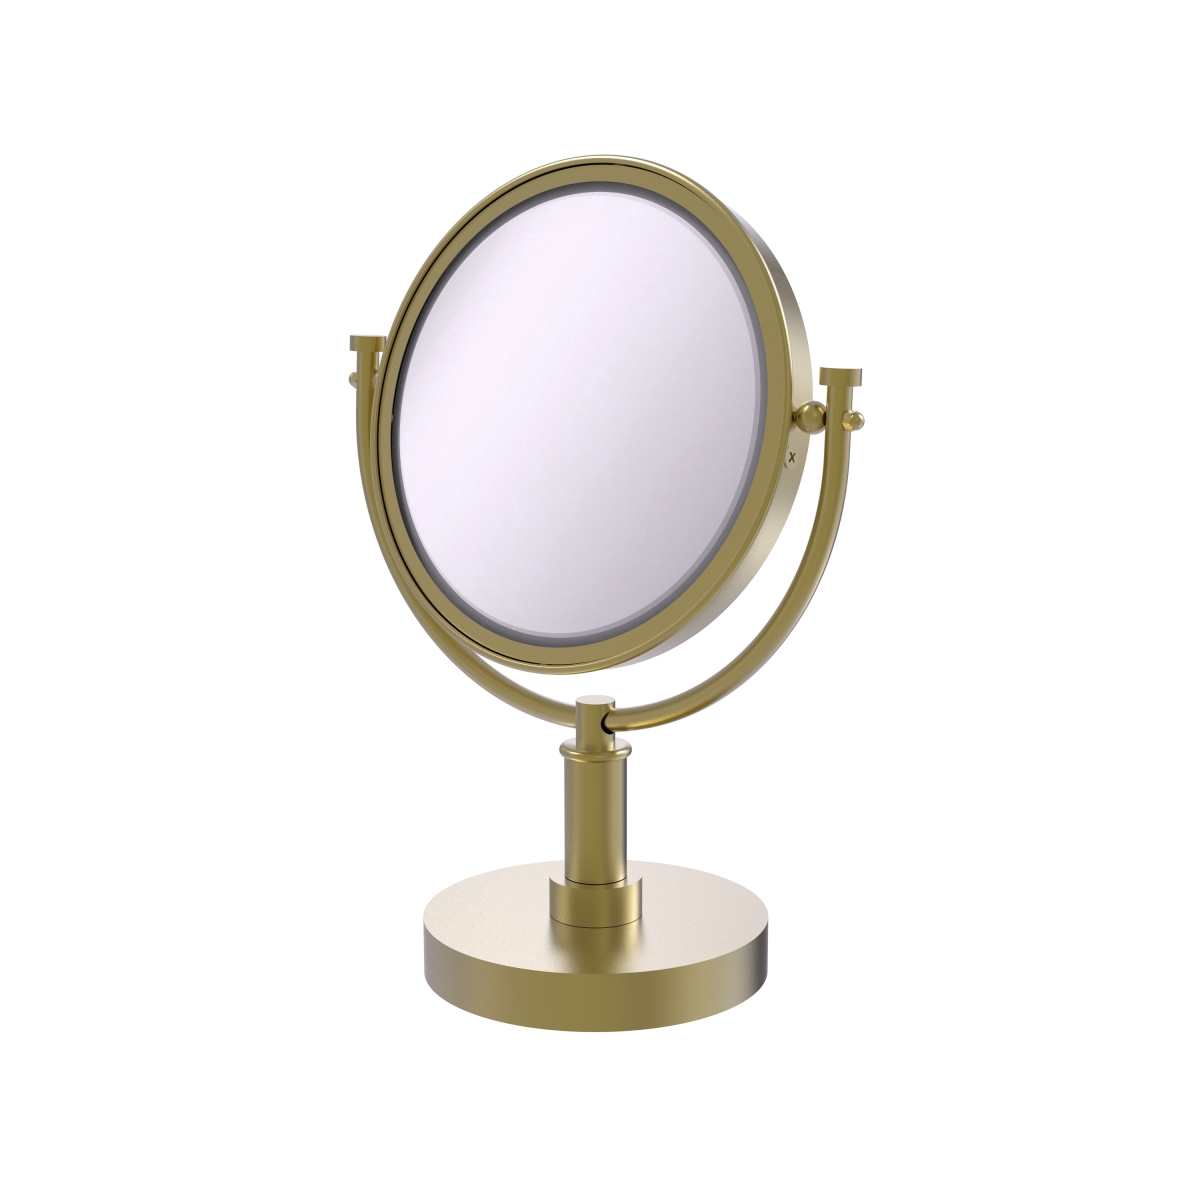 Dm-4-2x-sbr Smooth Ring Style 8 In. Vanity Top Make-up Mirror 2x Magnification, Satin Brass